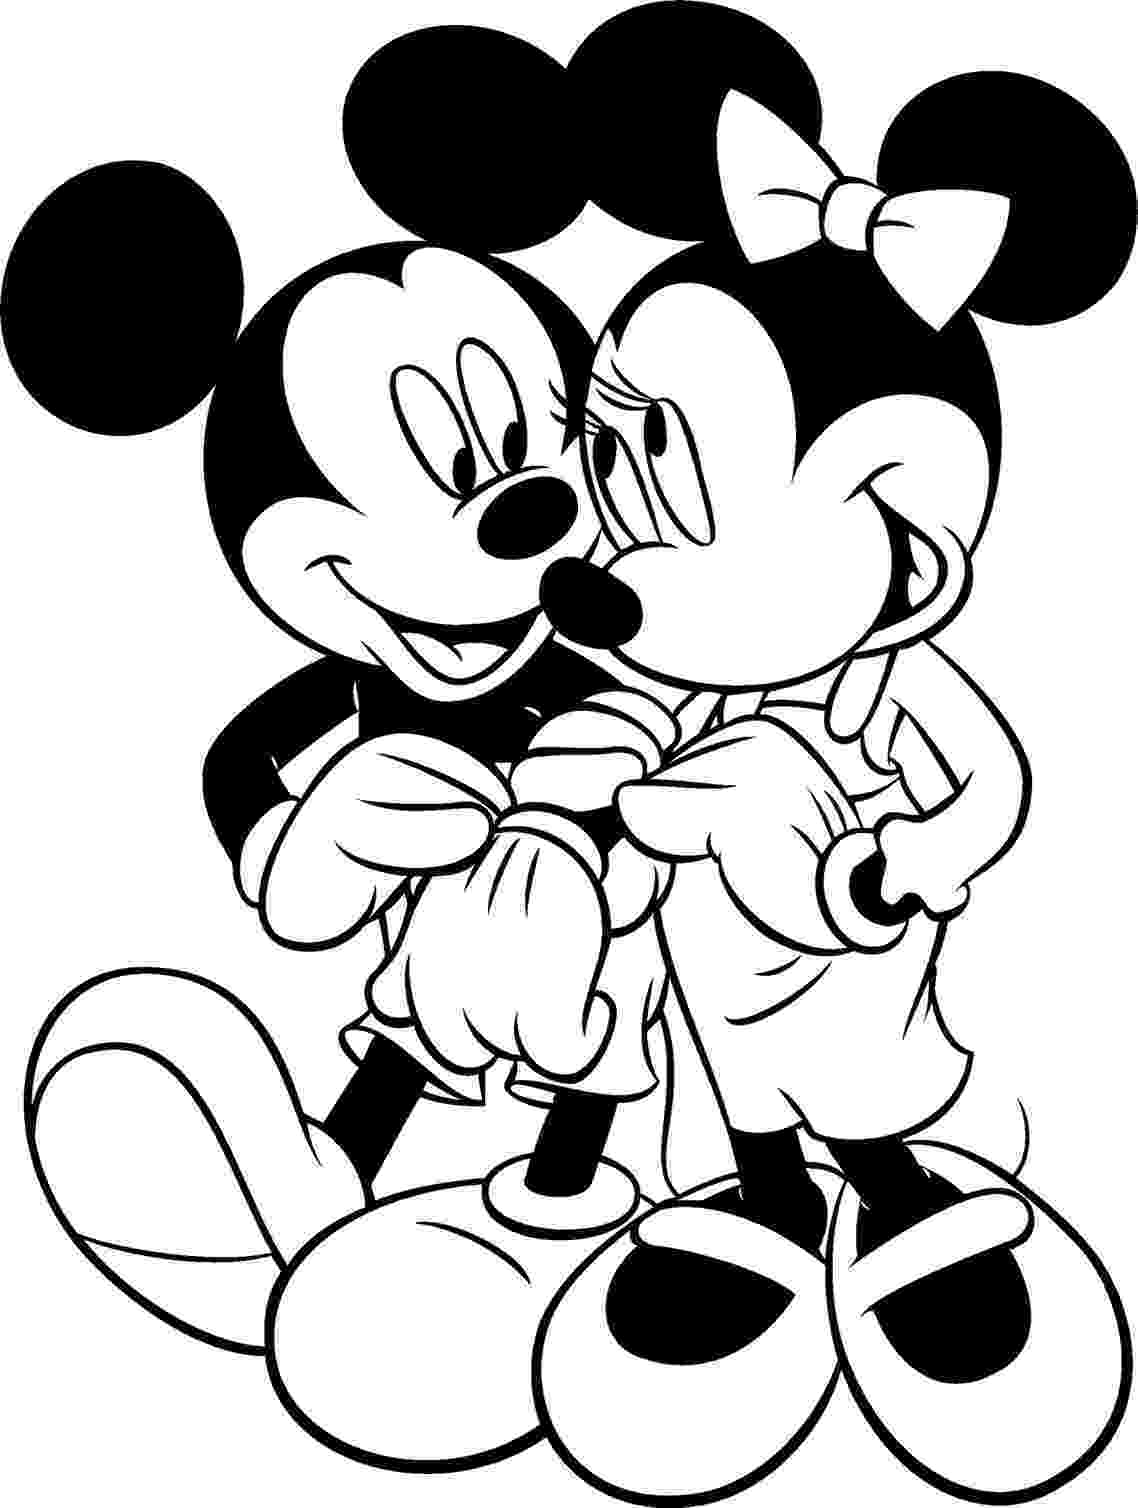 printable coloring sheets mickey mouse mickey mouse coloring pages 2 coloring pages to print mickey printable coloring mouse sheets 